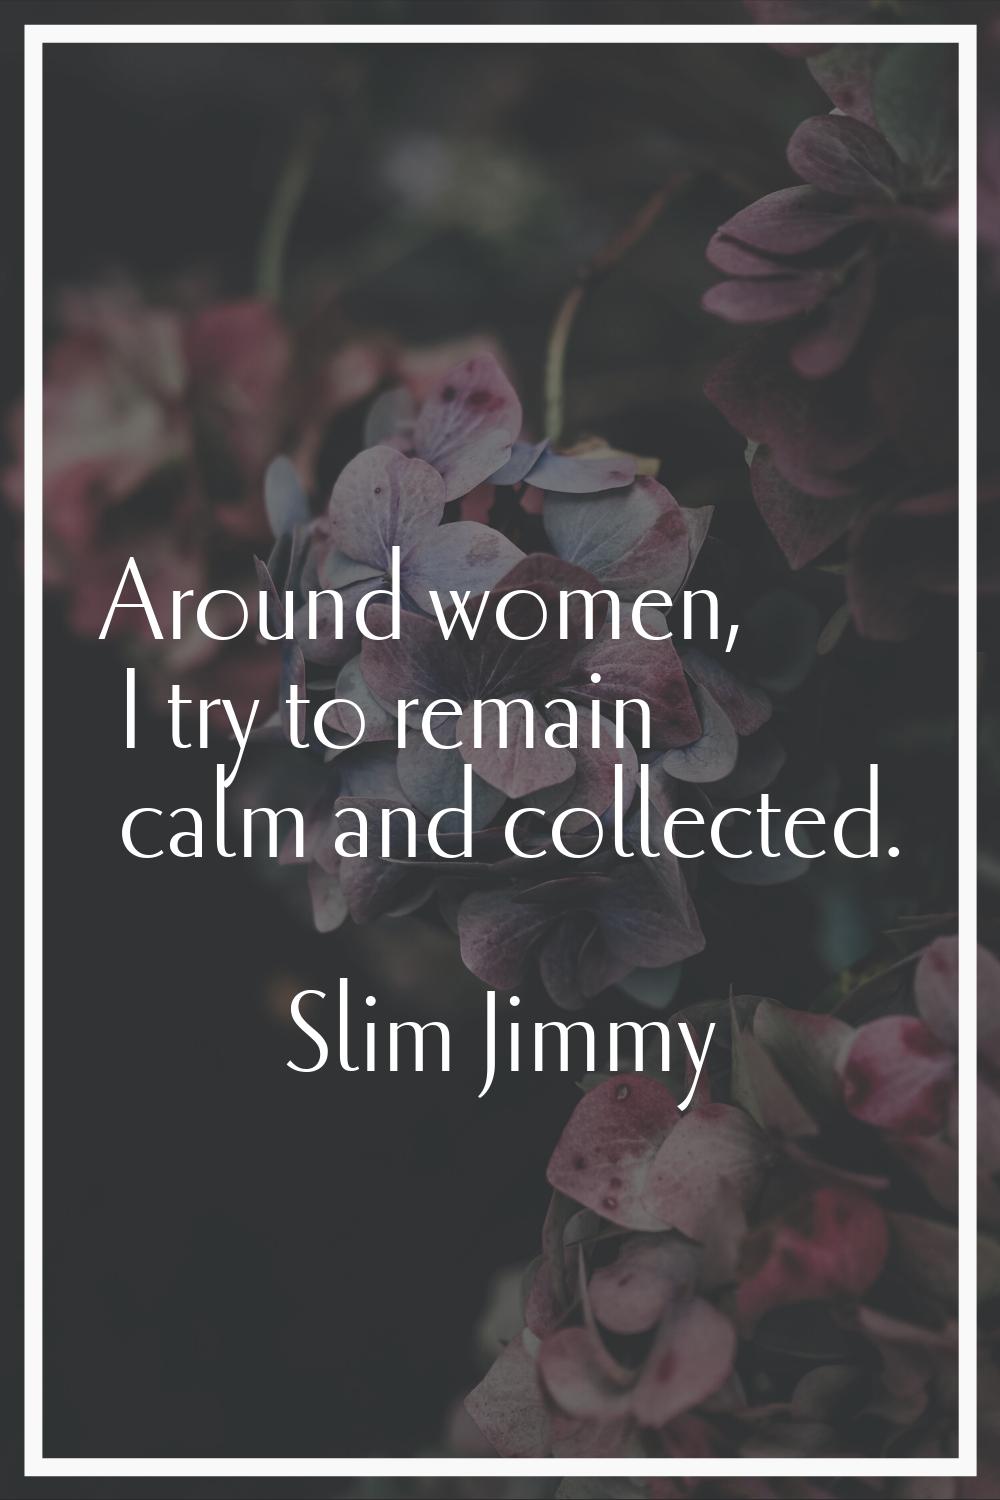 Around women, I try to remain calm and collected.